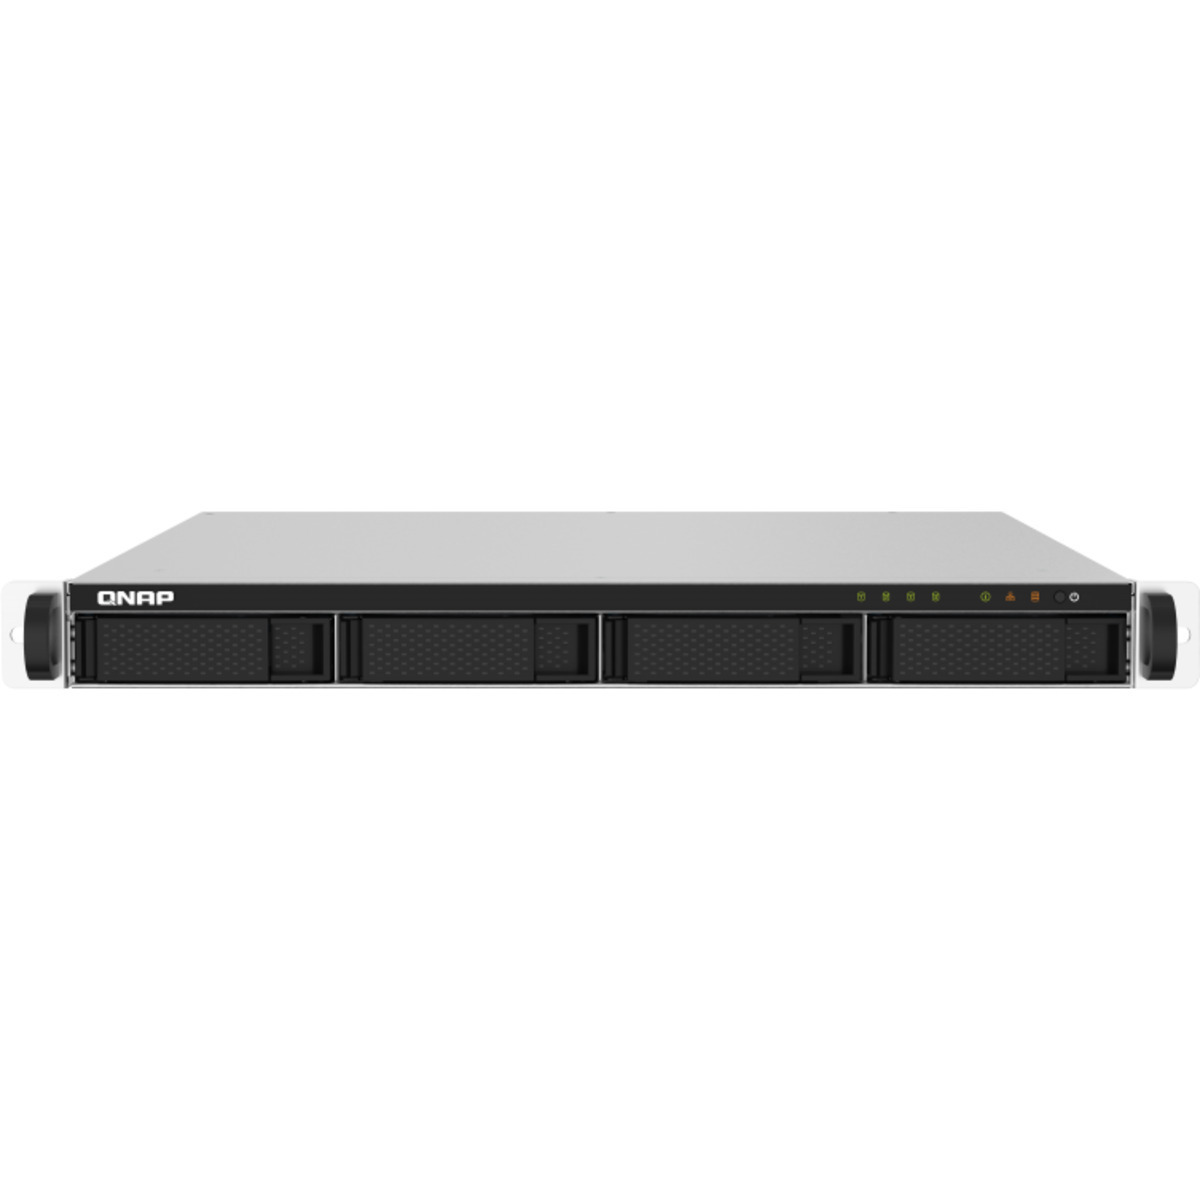 buy QNAP TS-432PXU RackMount NAS - Network Attached Storage Device Burn-In Tested Configurations - FREE RAM UPGRADE - nas headquarters buy network attached storage server device das new raid-5 free shipping usa TS-432PXU